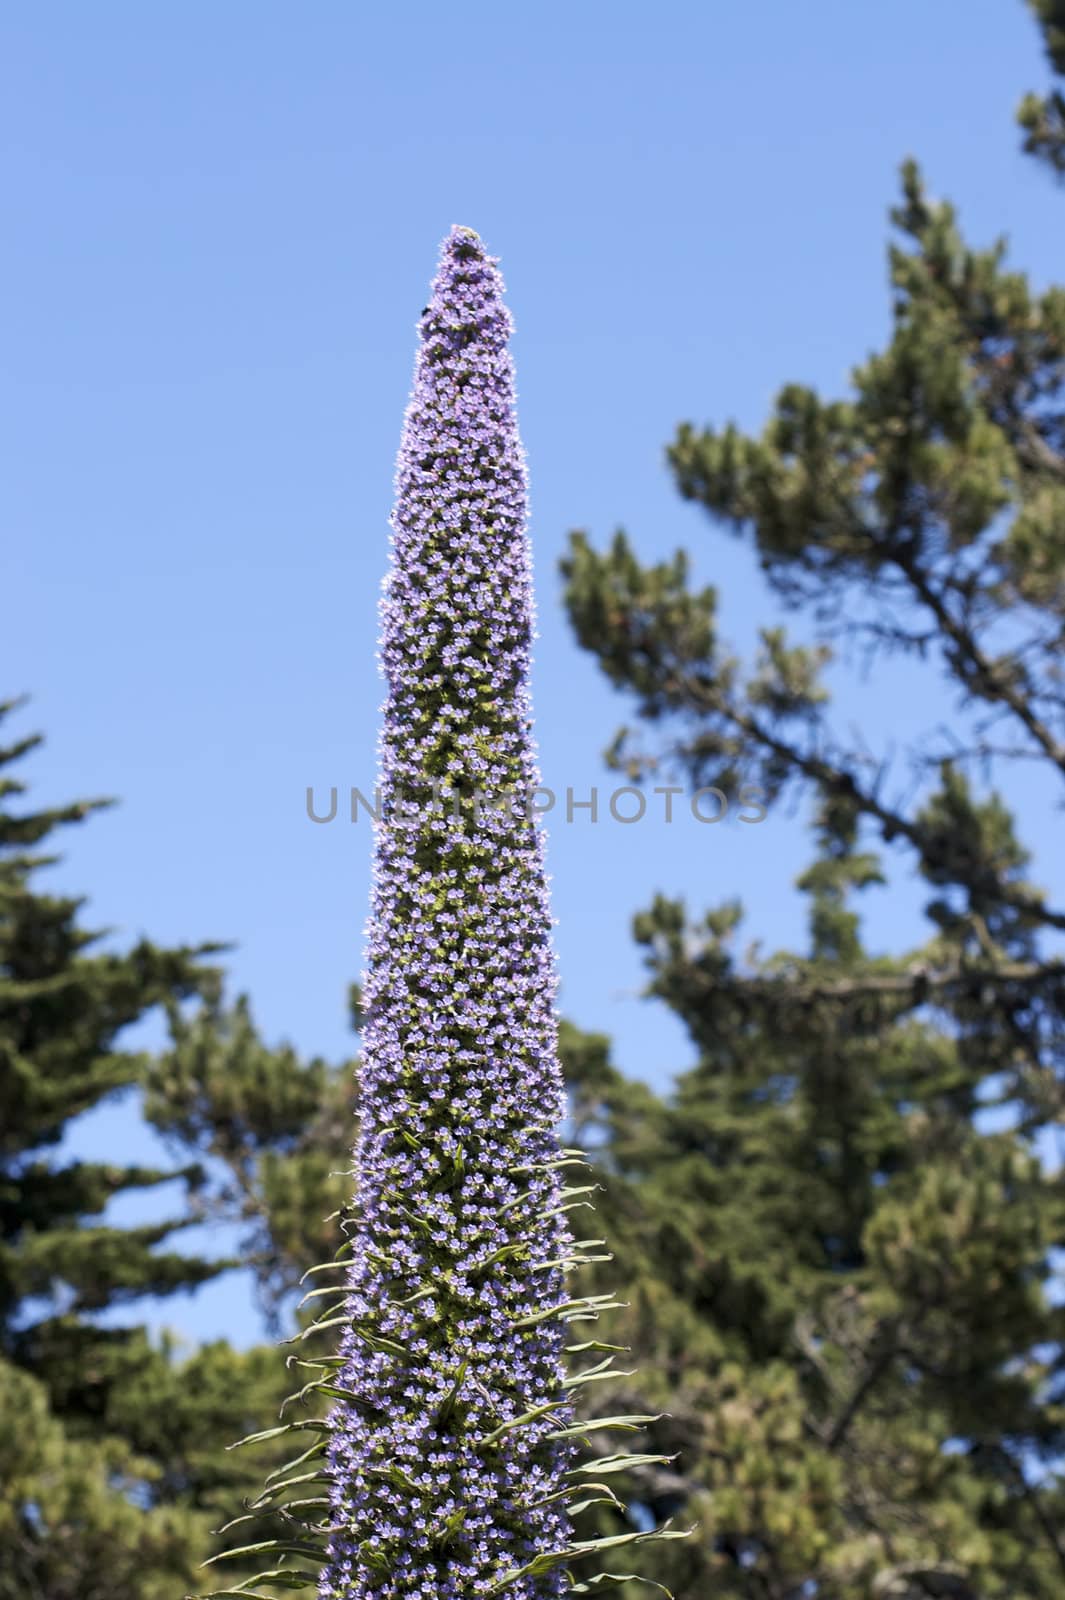 A great shot of a Pride of Madeira (Echium candicans) flower.